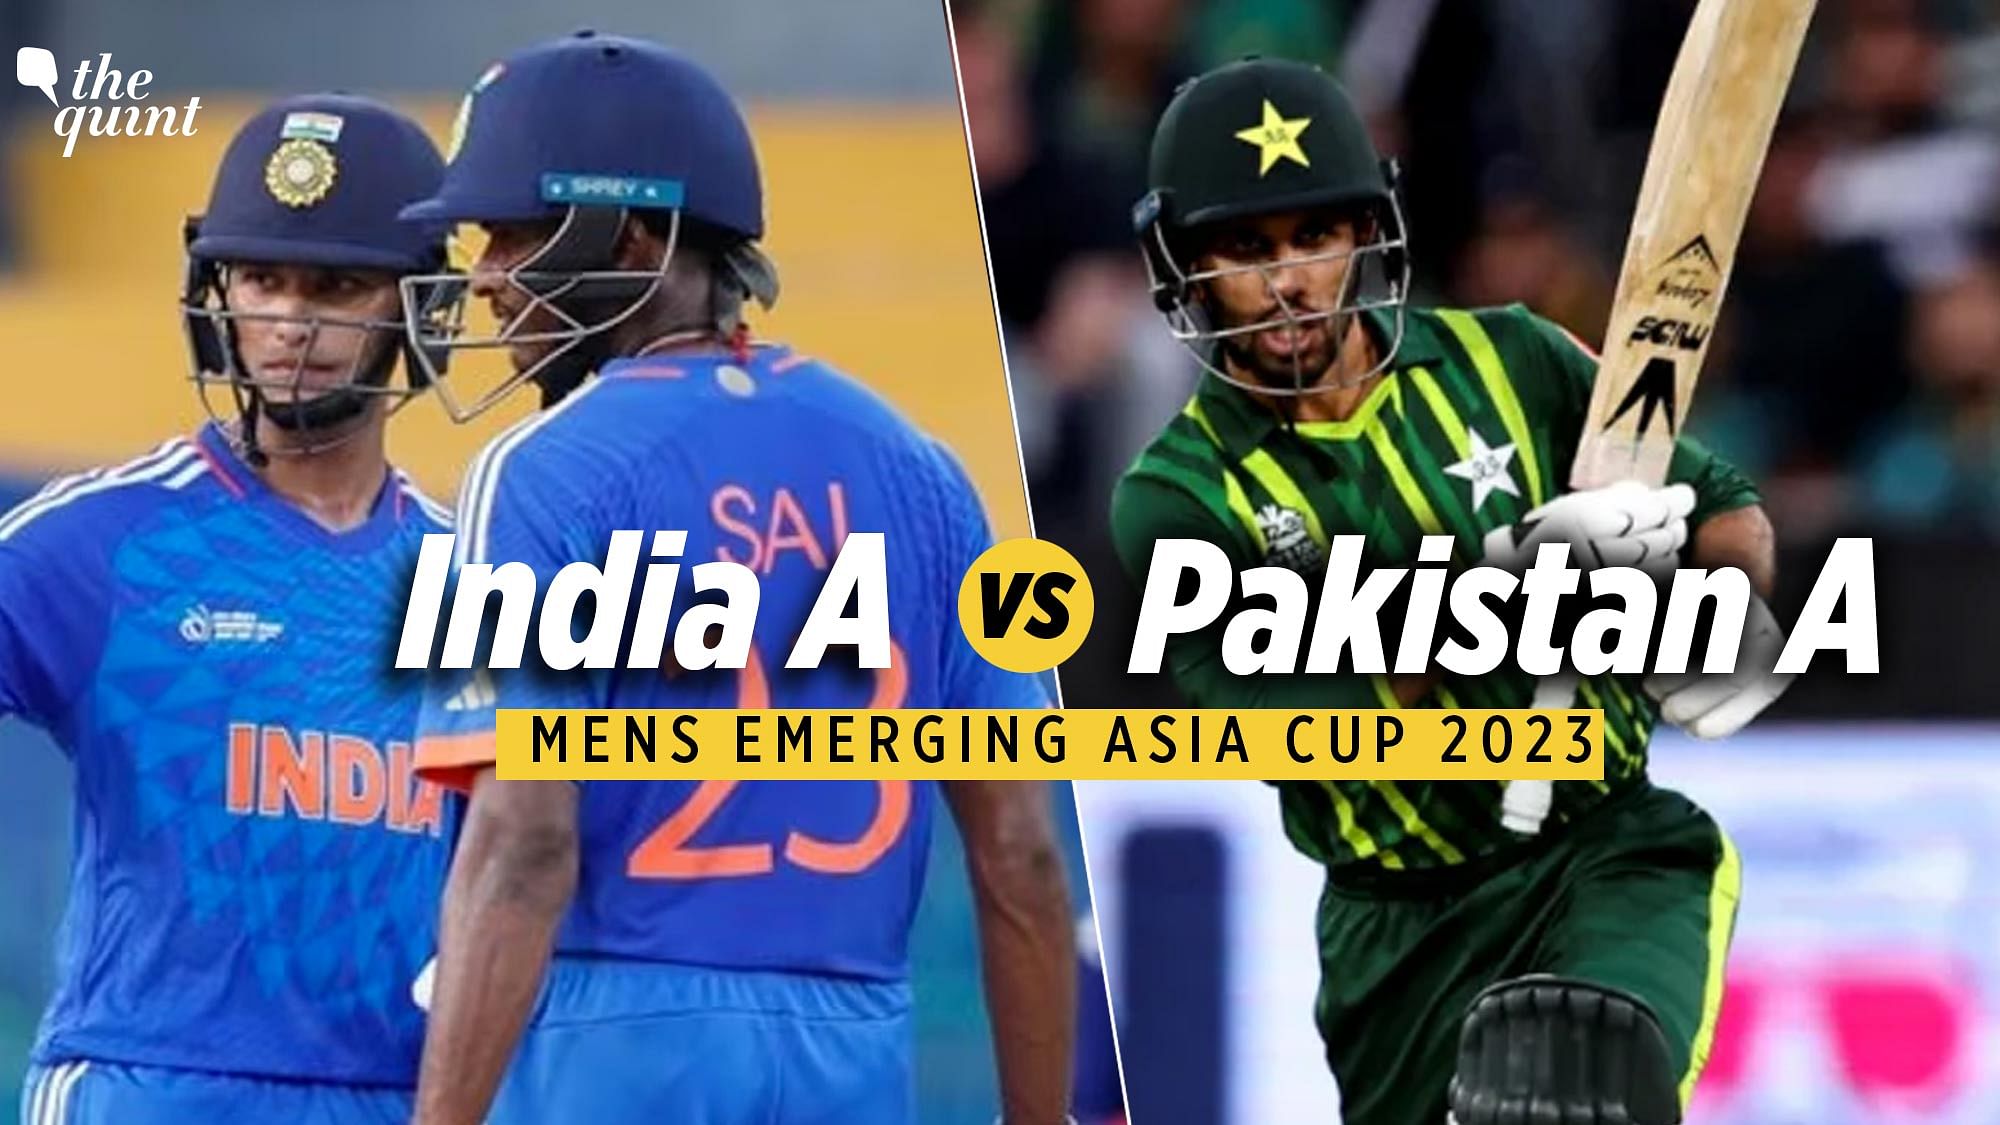 ACC Mens Emerging Asia Cup 2023 India A vs Pakistan A Live Streaming, Telecast, Squads, Date, Time, Venue, and Everything You Must Know